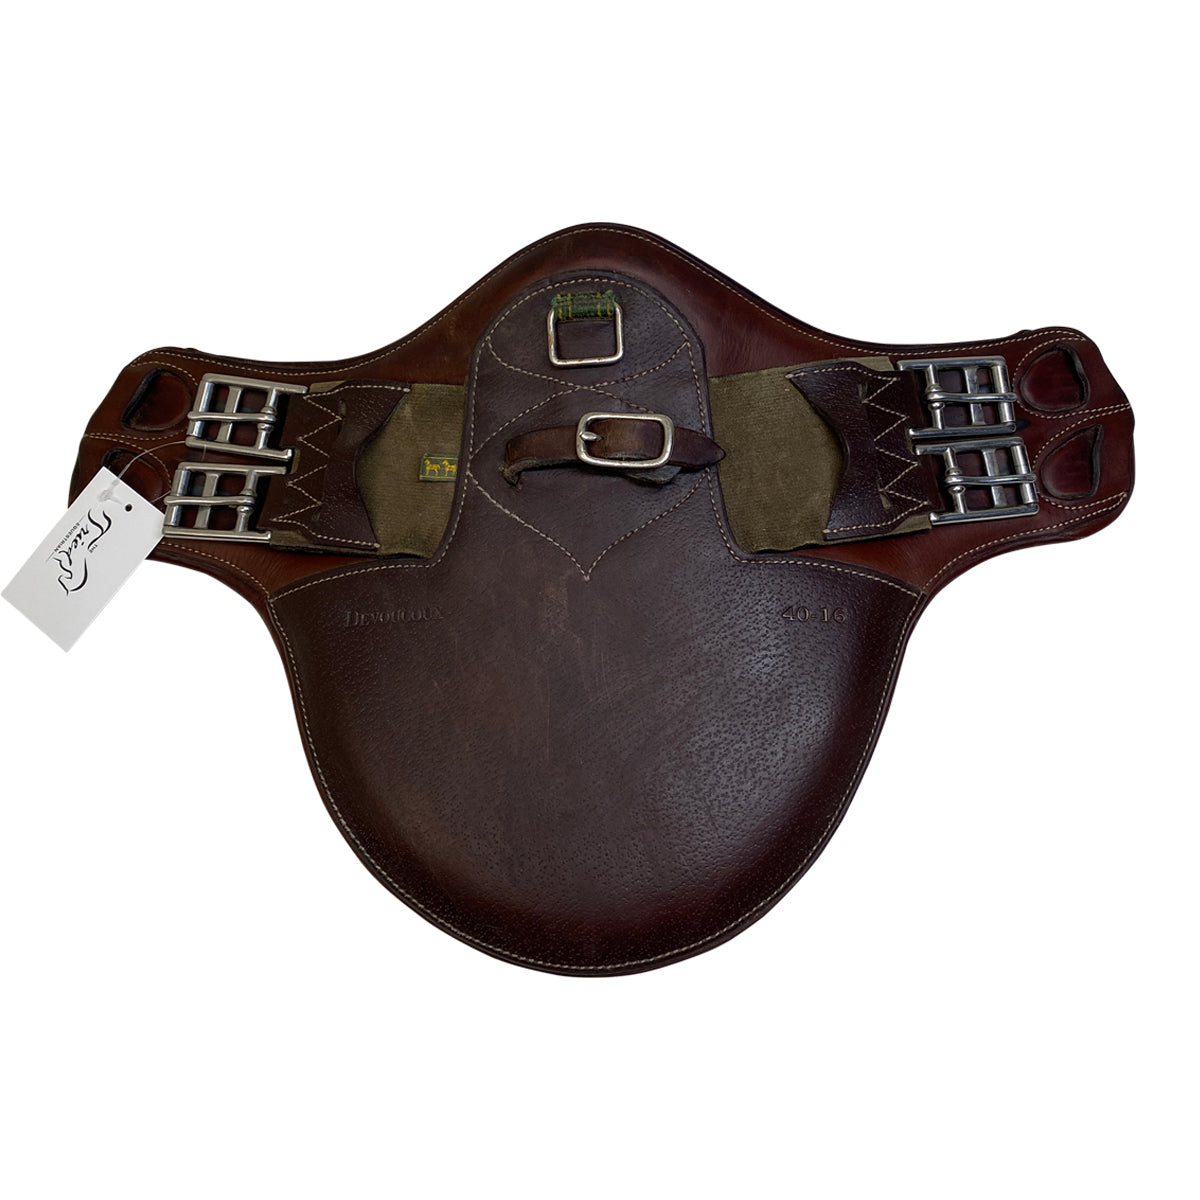 Devoucoux Short Belly Guard Girth in Brown